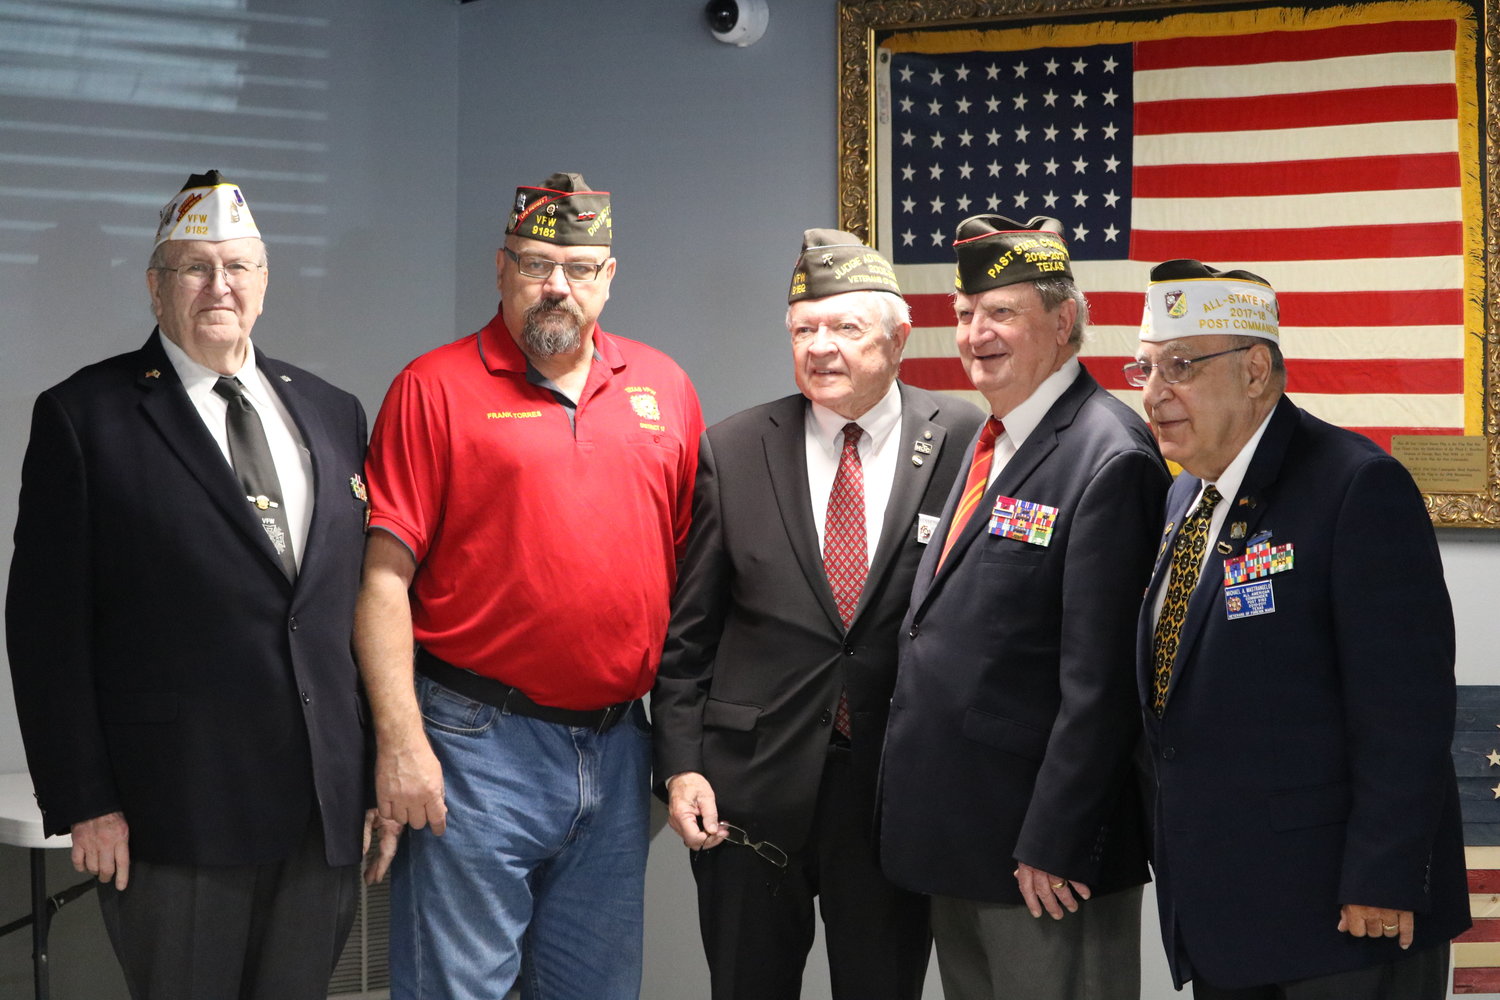 Retired service members pose for a photo after Saturday's 9/11 event at the Katy VFW.